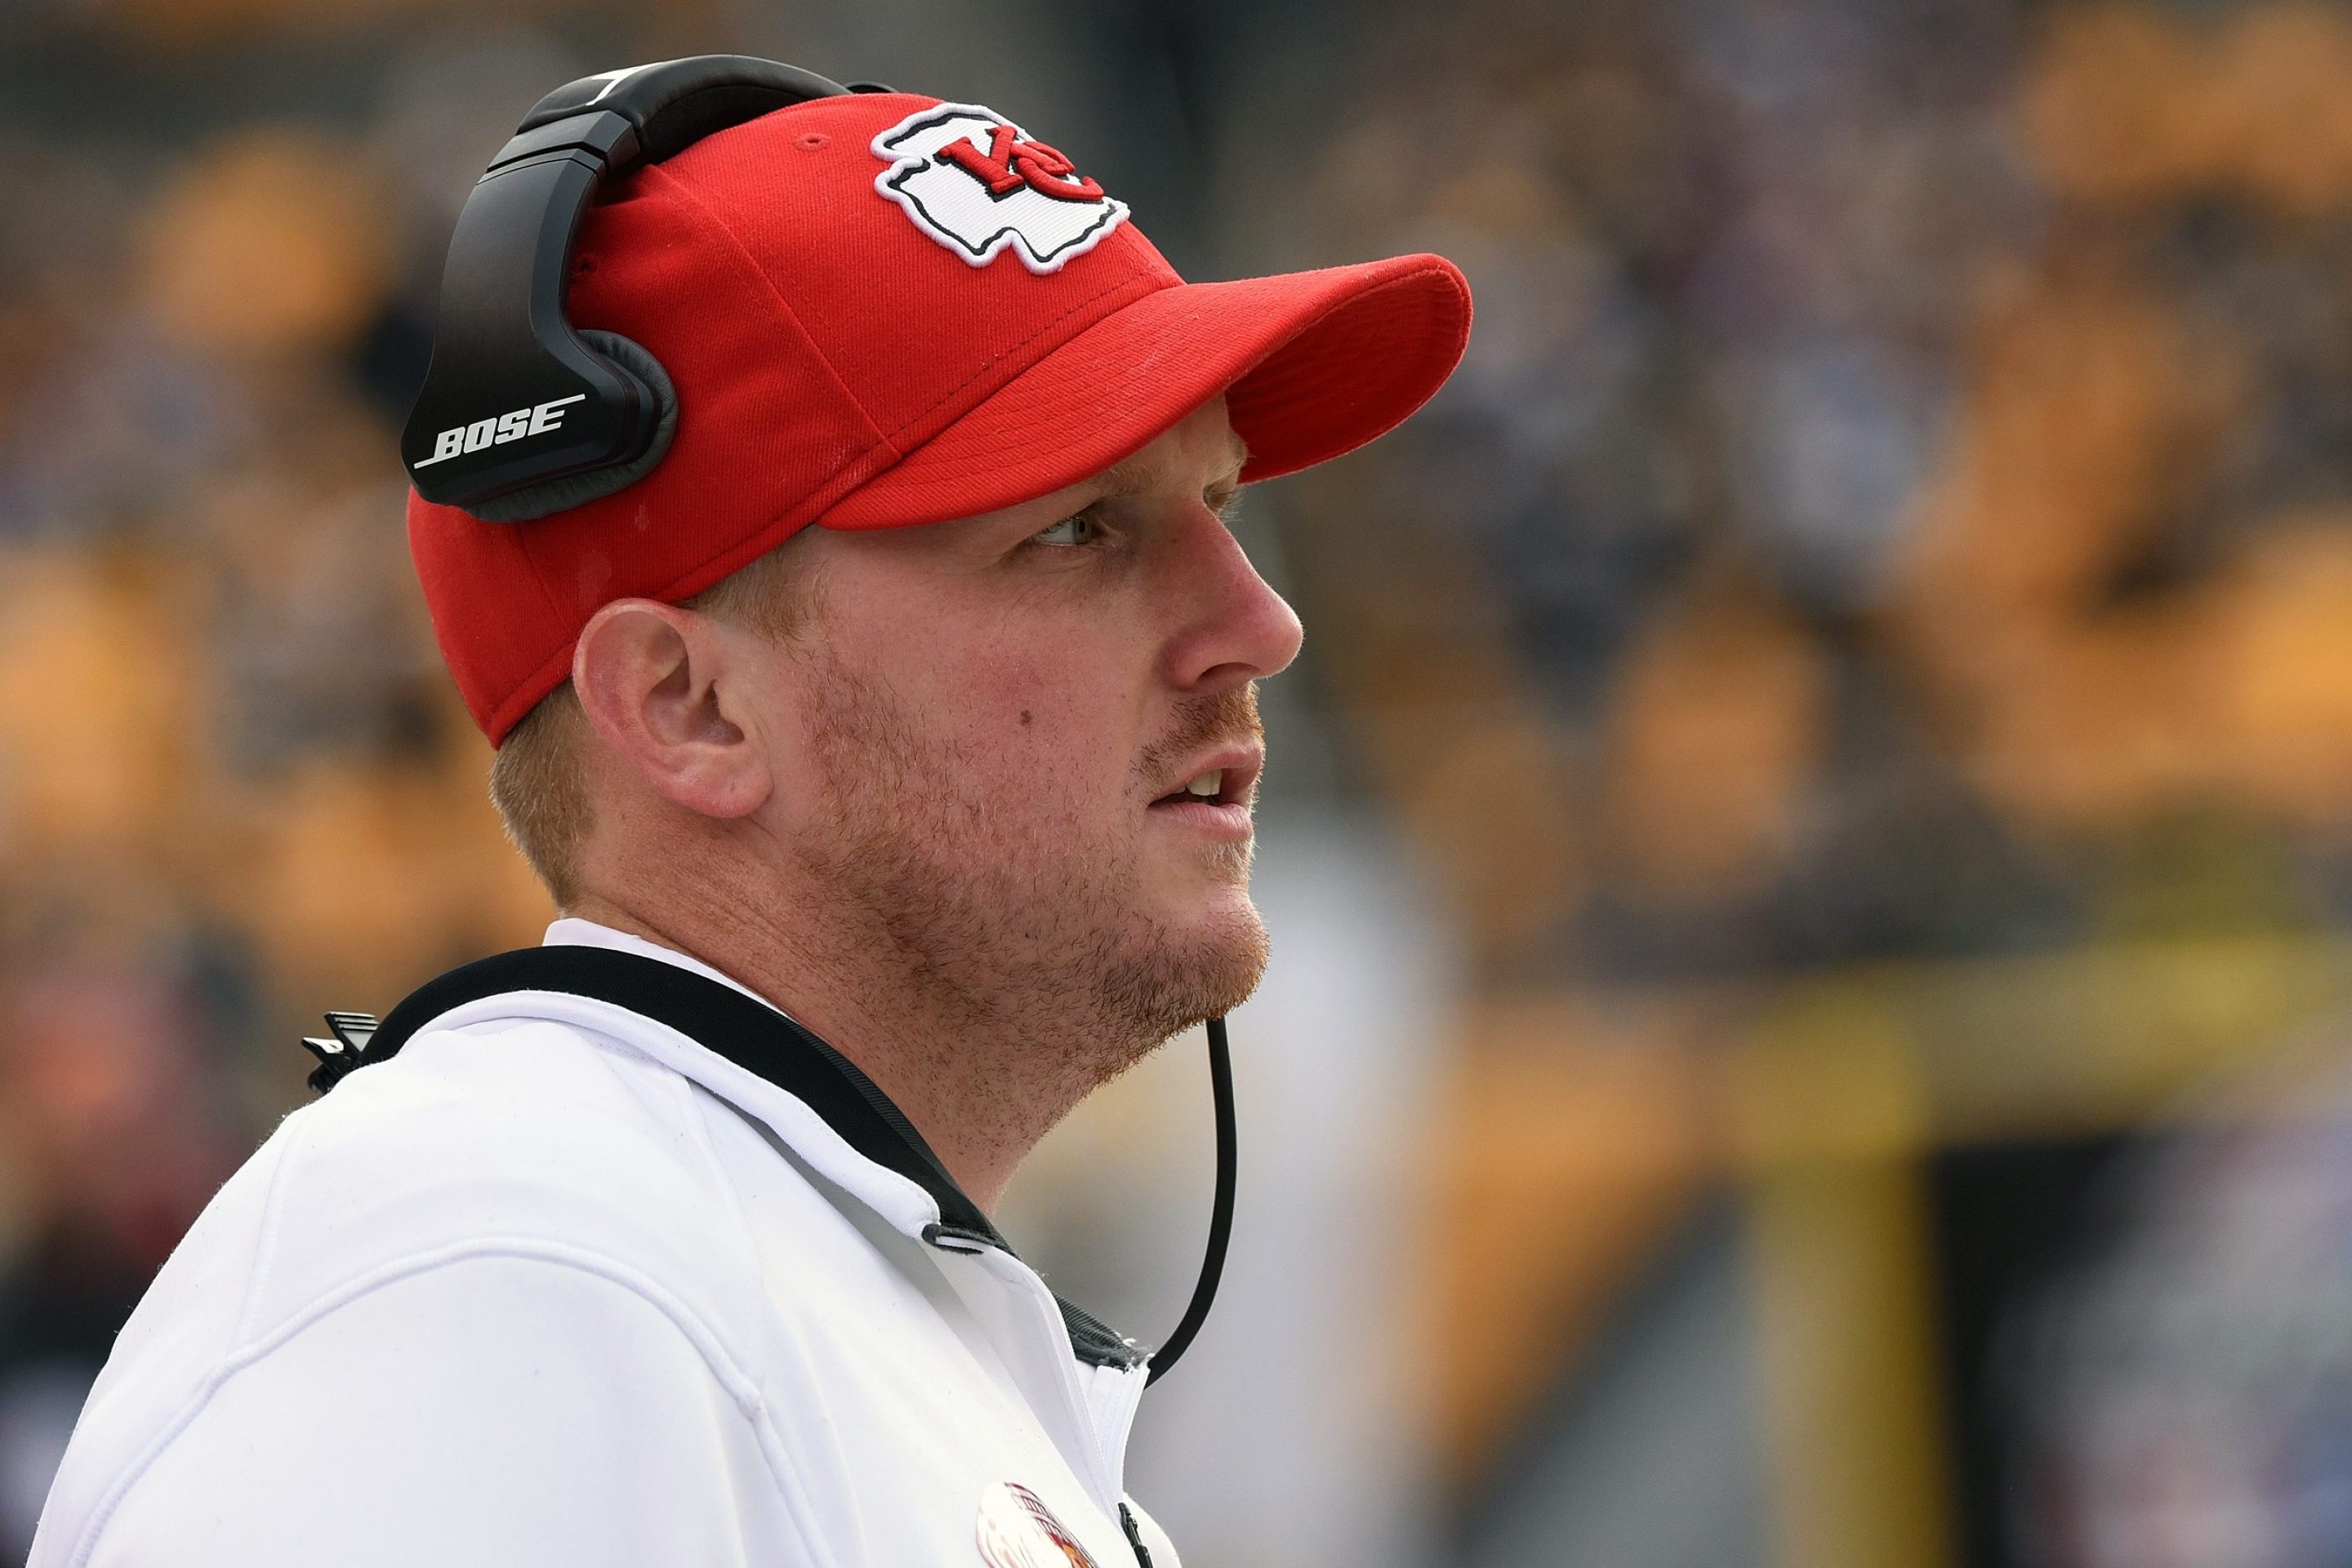 Then-Quality control coach Britt Reid of the Kansas City Chiefs looks on from the sideline before a game against the Pittsburgh Steelers at Heinz Field on December 21, 2014 in Pittsburgh, Pennsylvania.